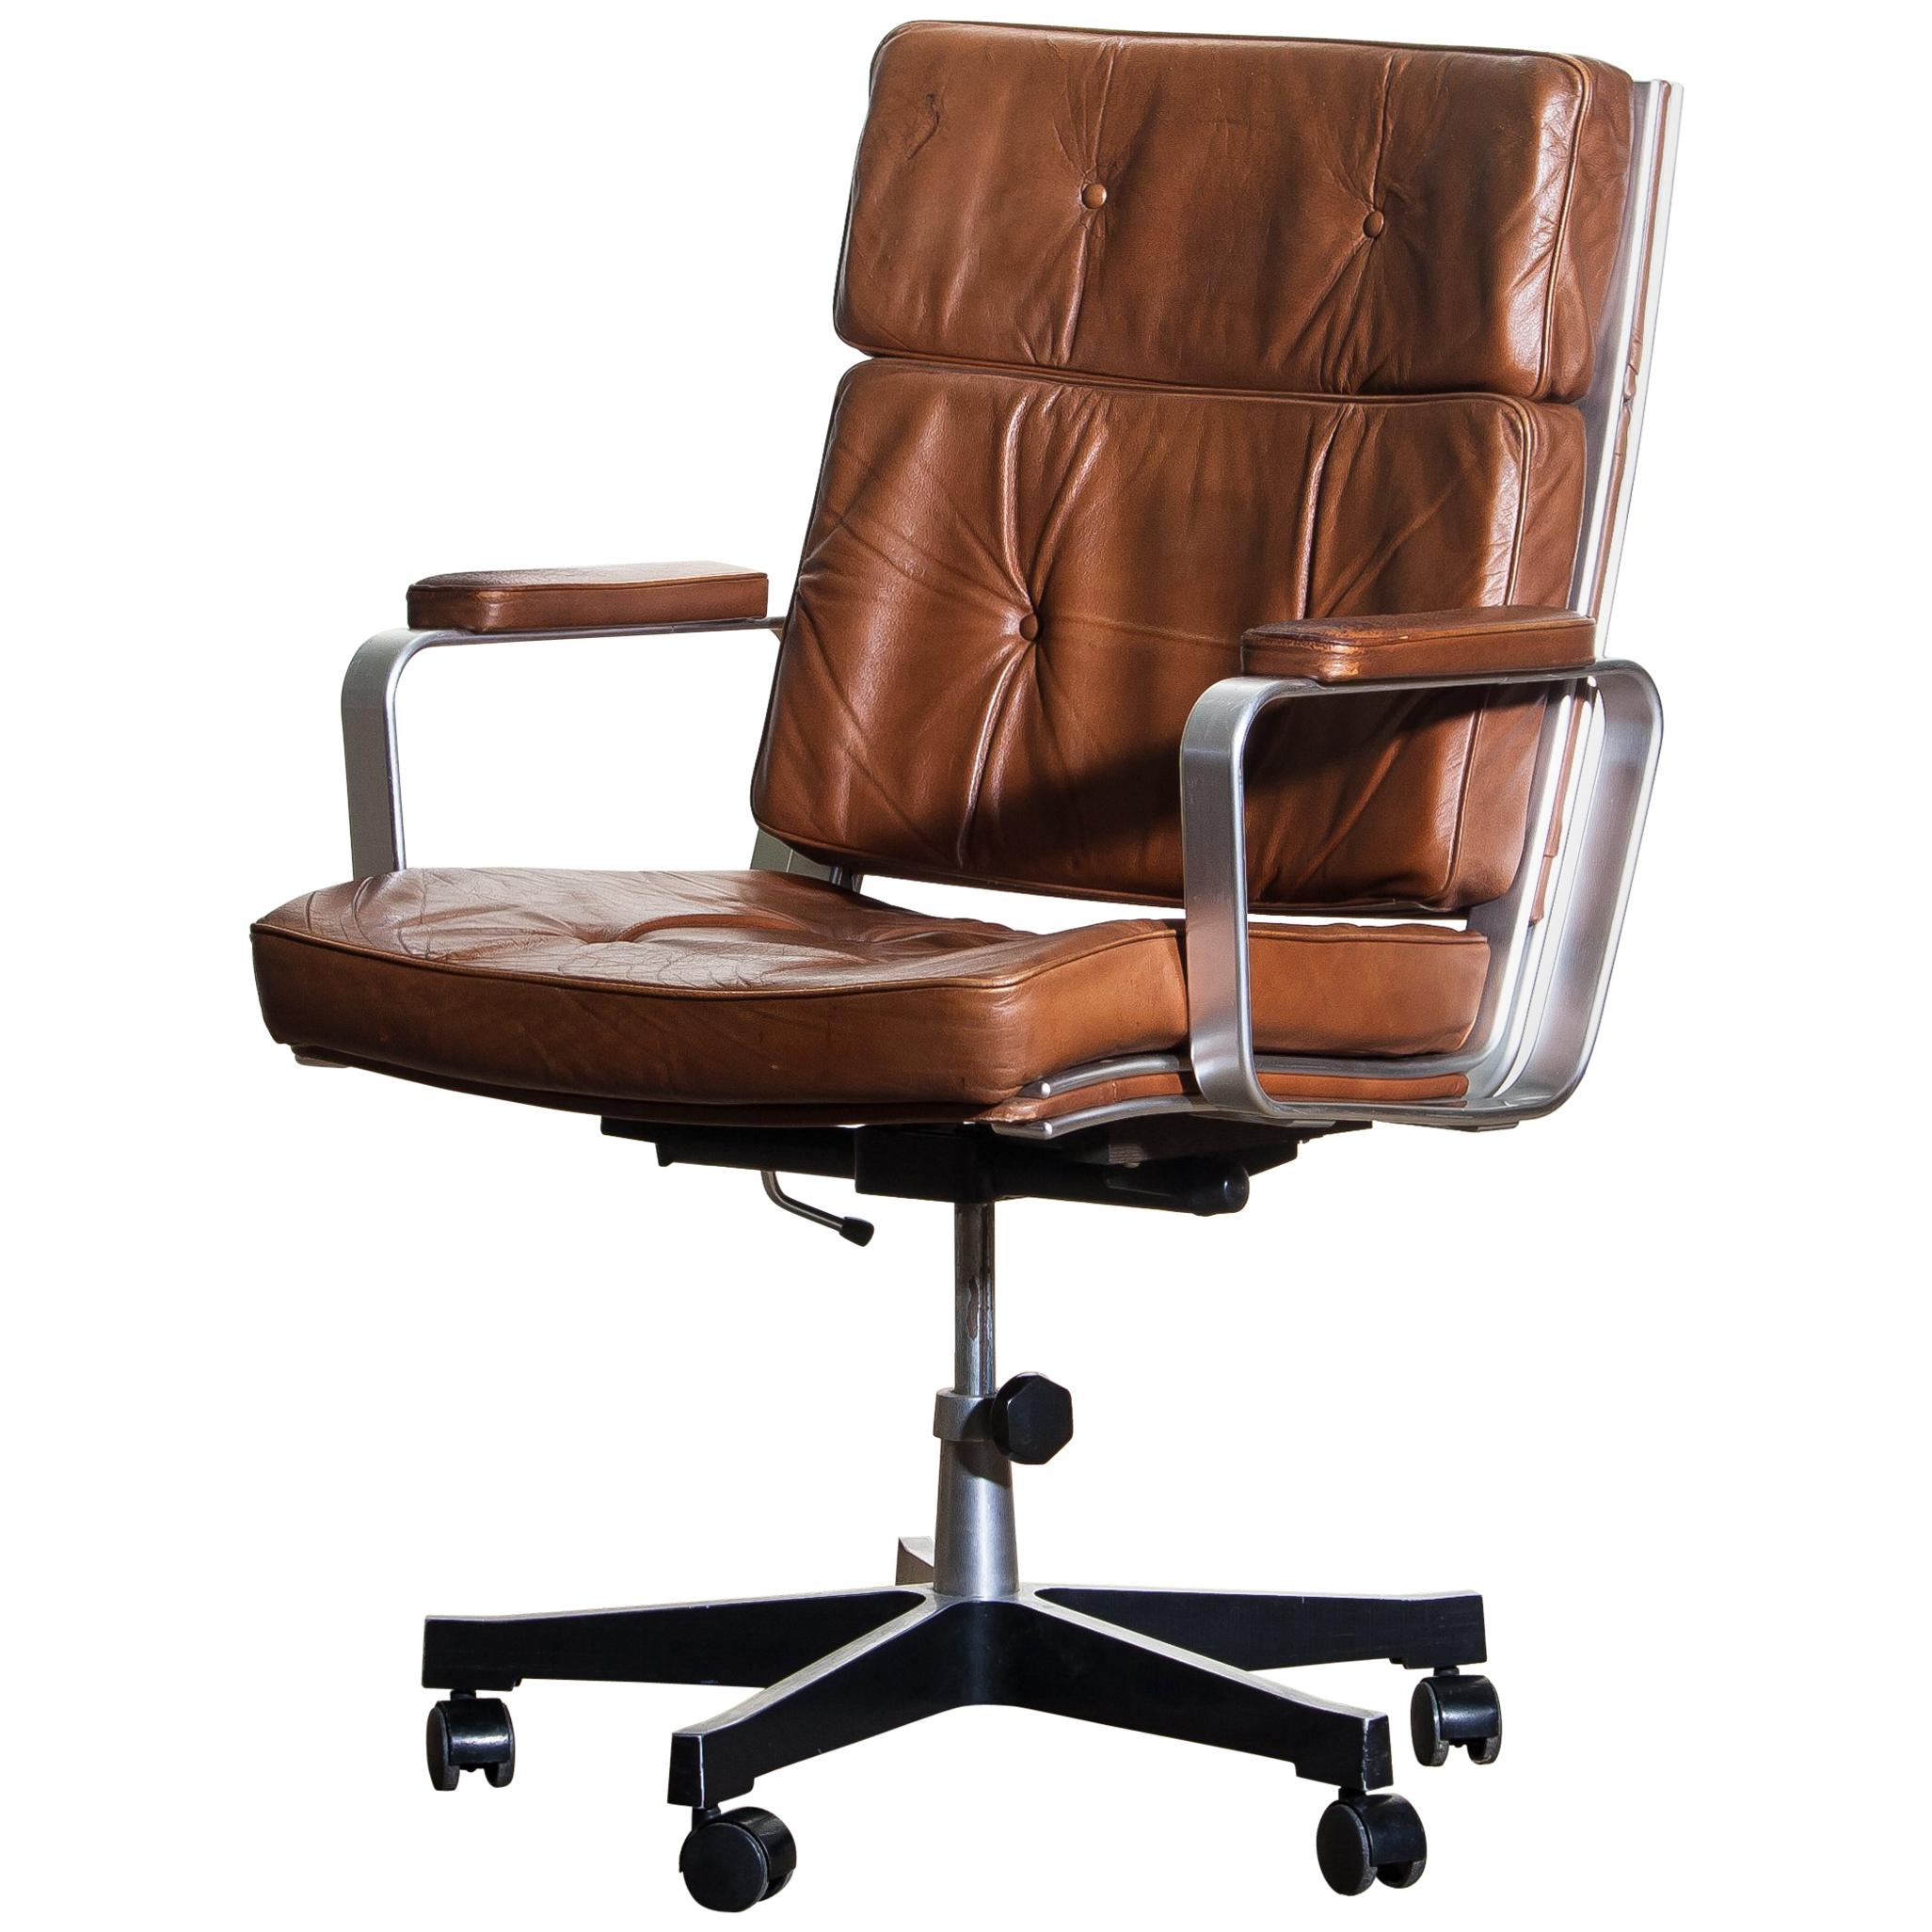 1970s, Brown Leather and Aluminum Desk Chair by Karl Erik Ekselius for Joc